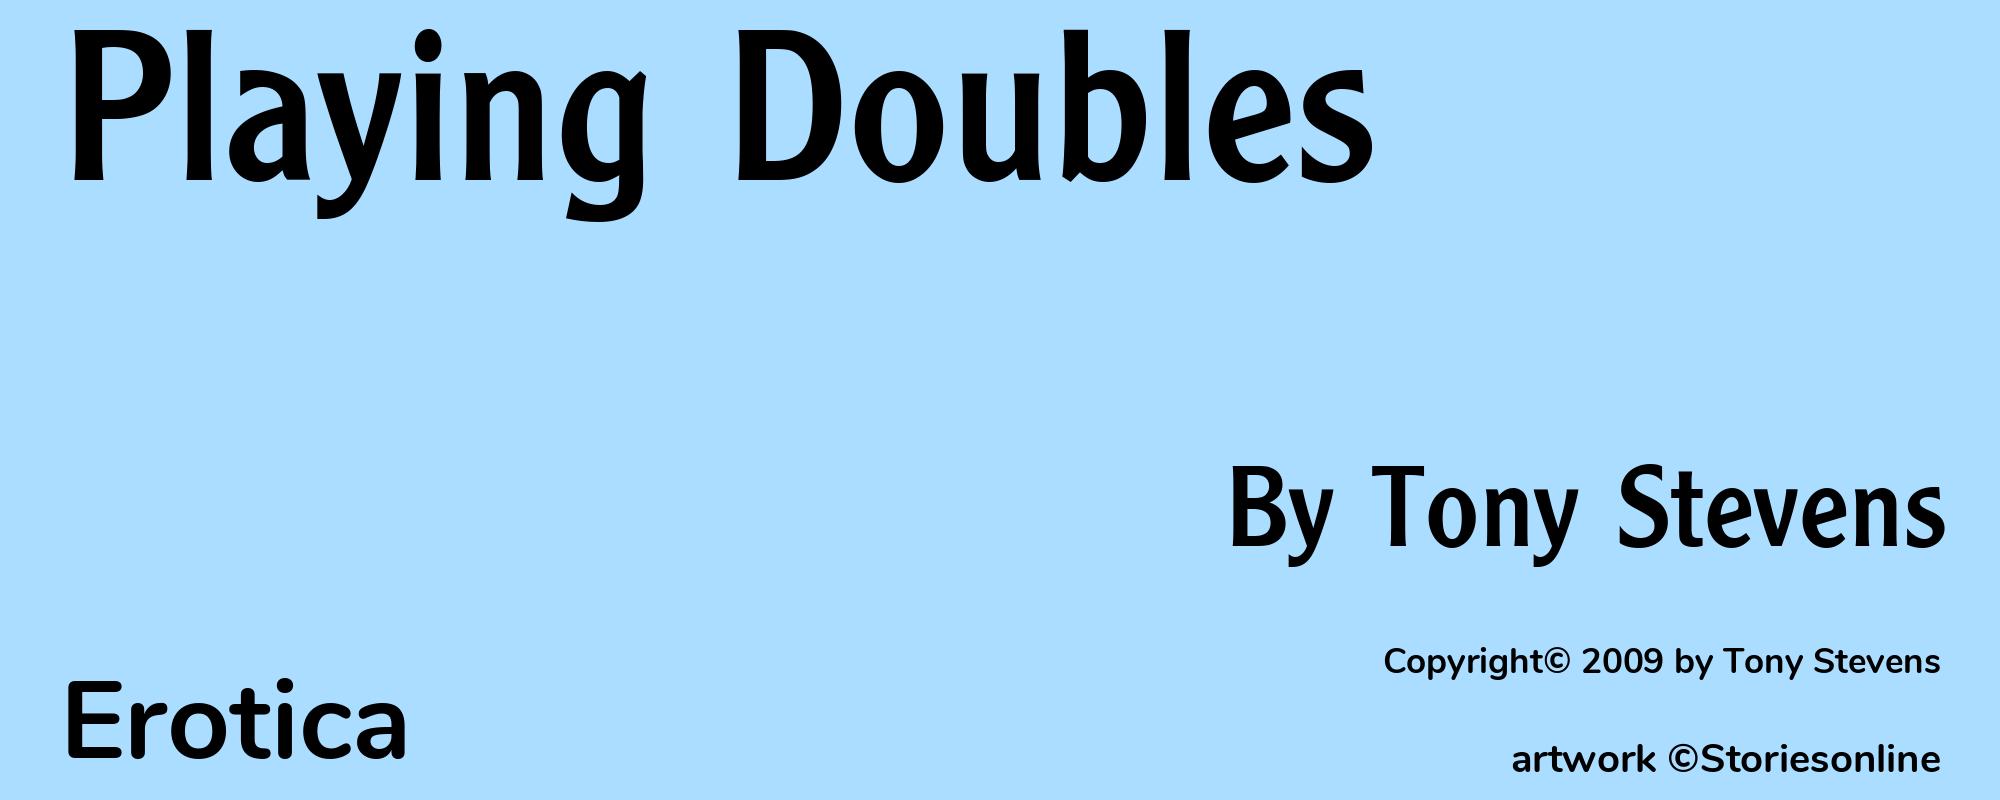 Playing Doubles - Cover